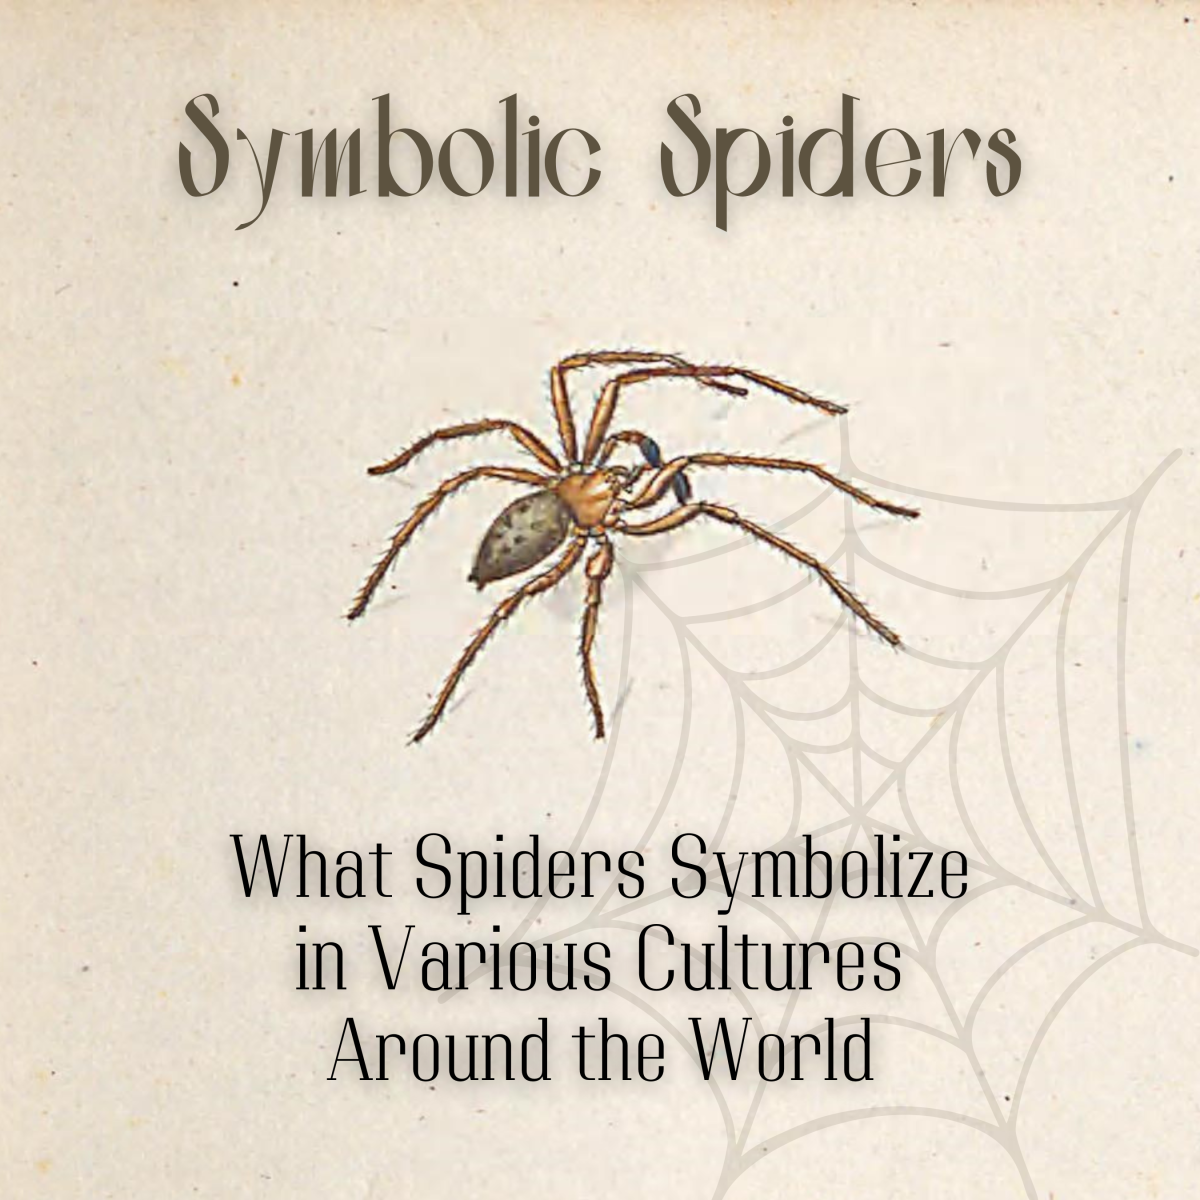 SPIDER definition and meaning